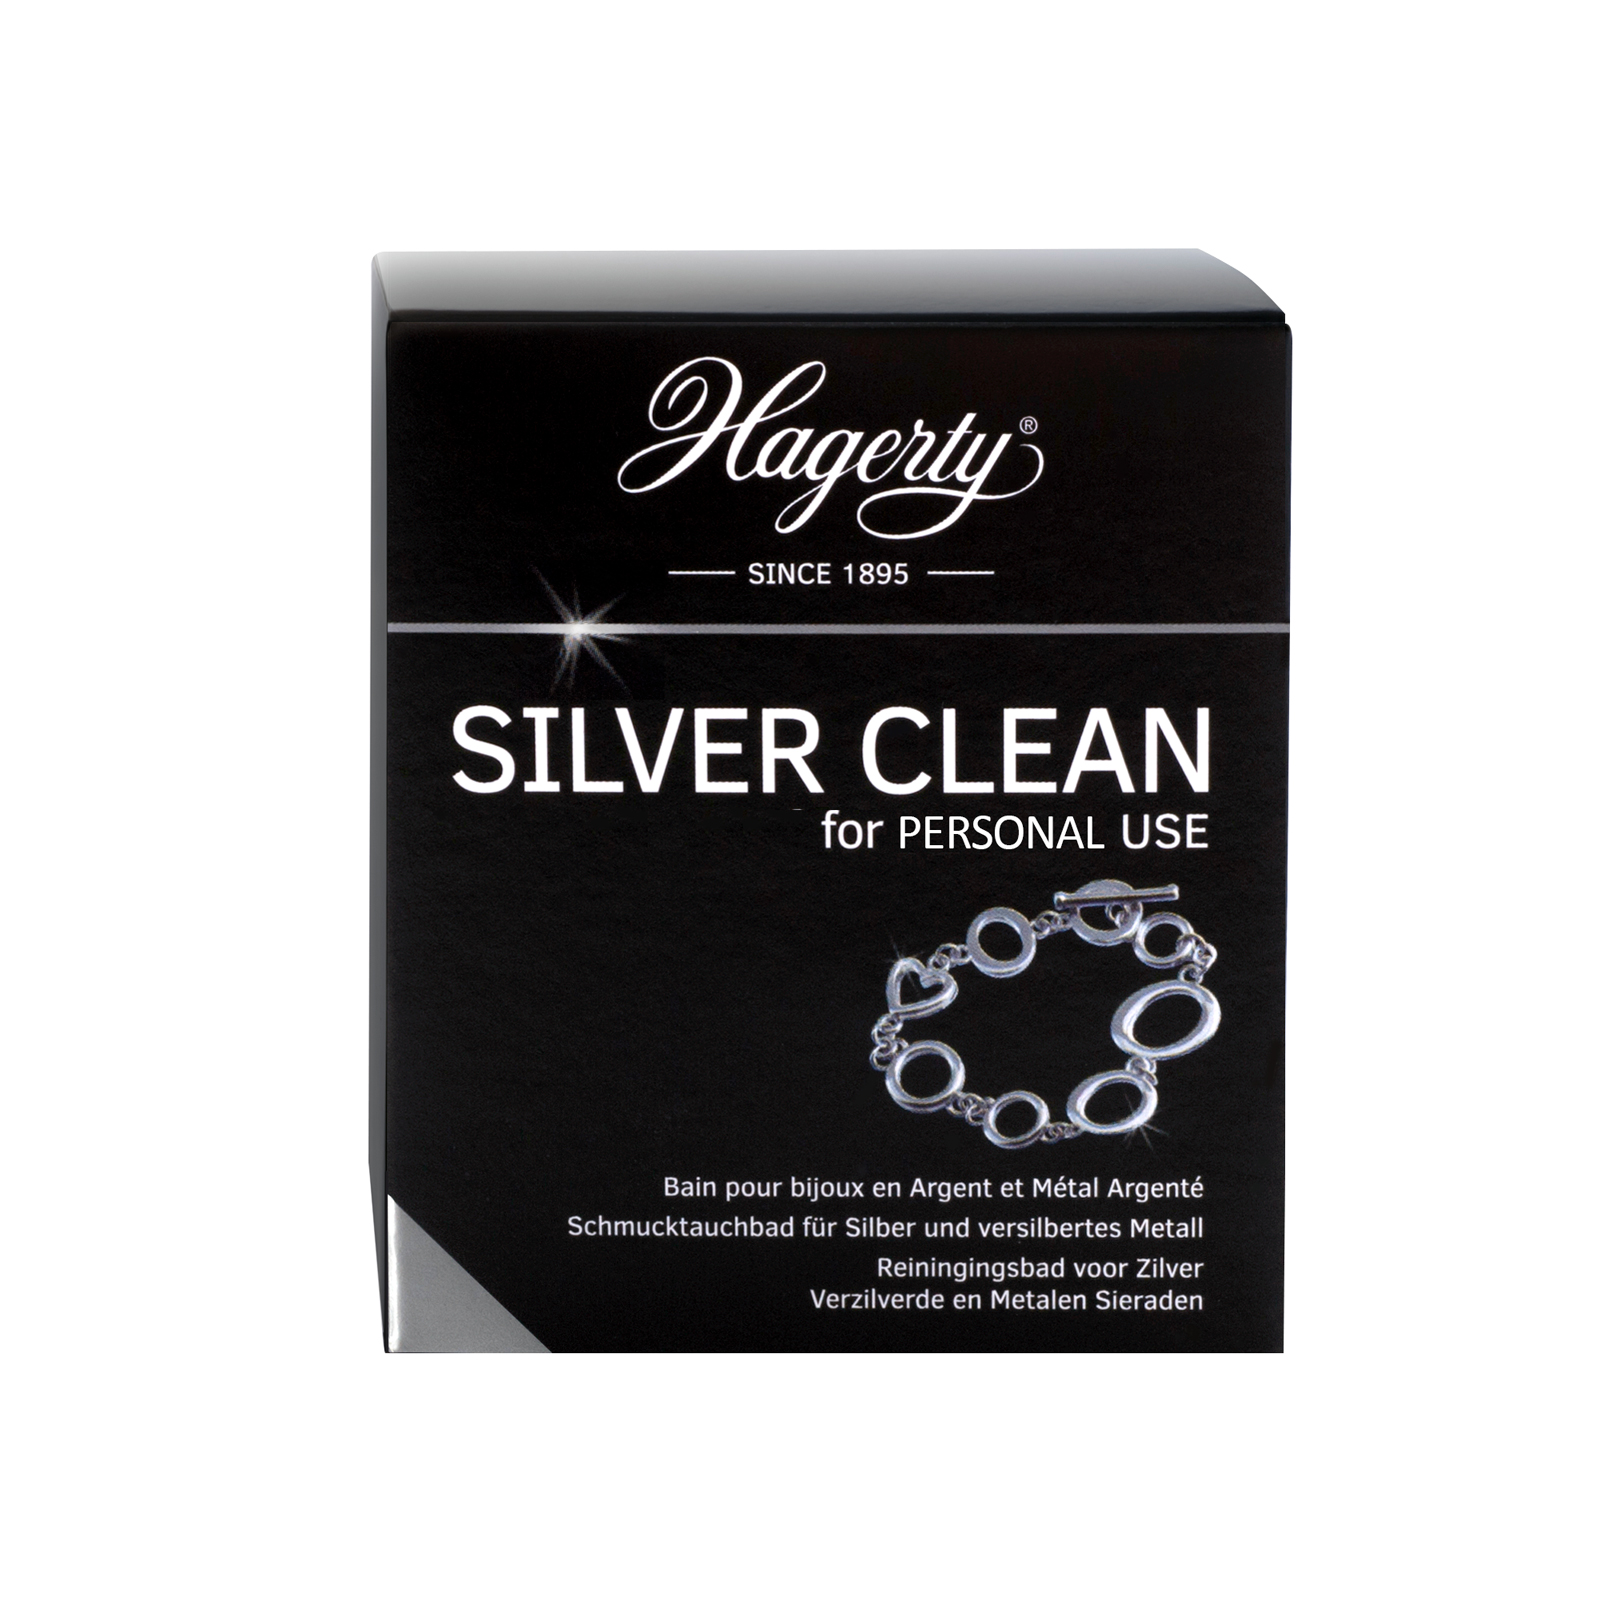 Hagerty Silver Clean for personal use, dipping bath for silver, 170 ml